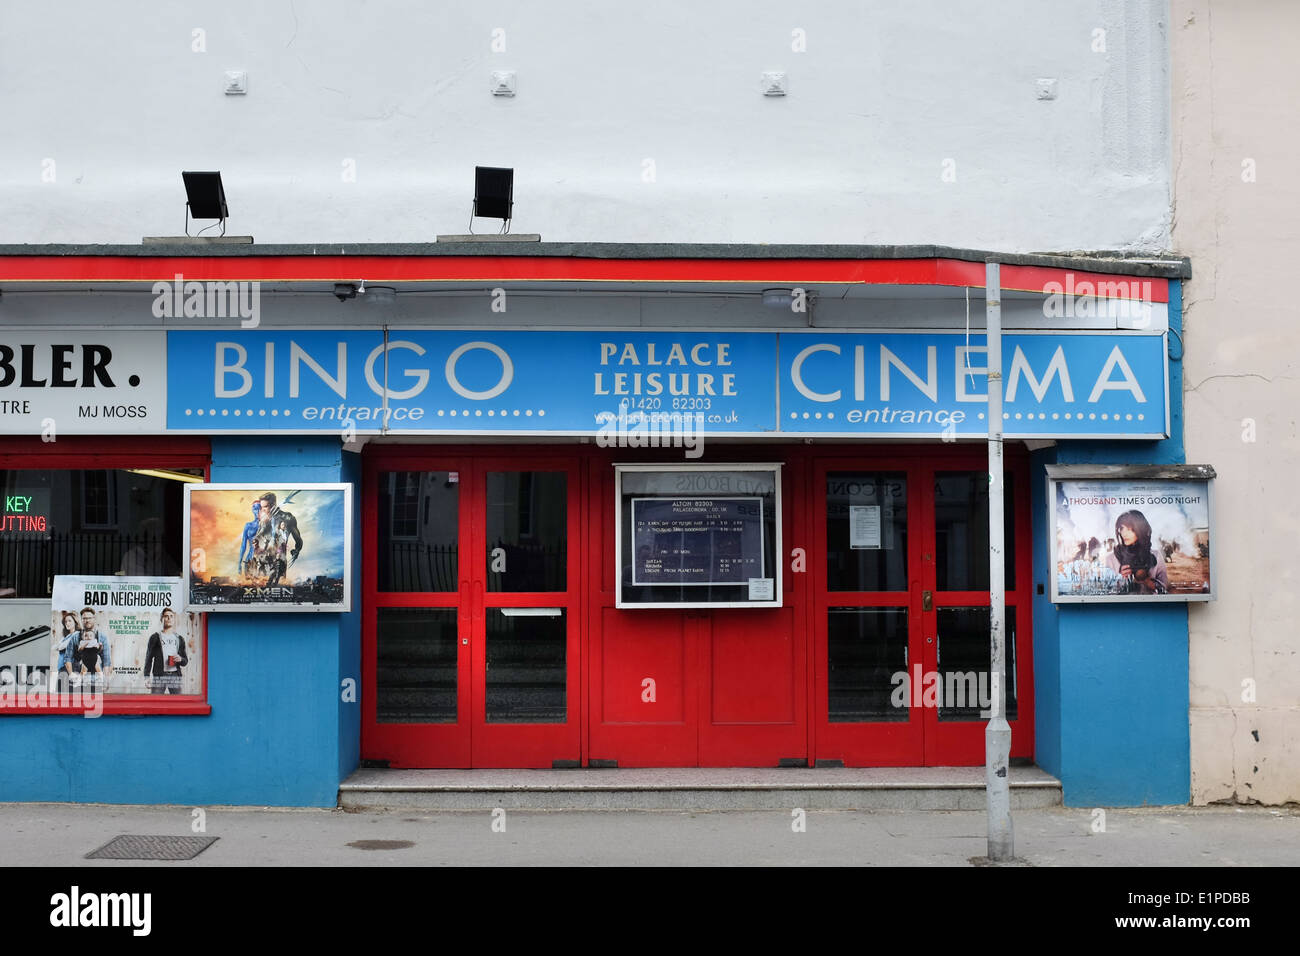 Exterior of Palace Leisure Bingo and Cinema at 58 Normandy Street in Alton, Hampshire. UK. Stock Photo